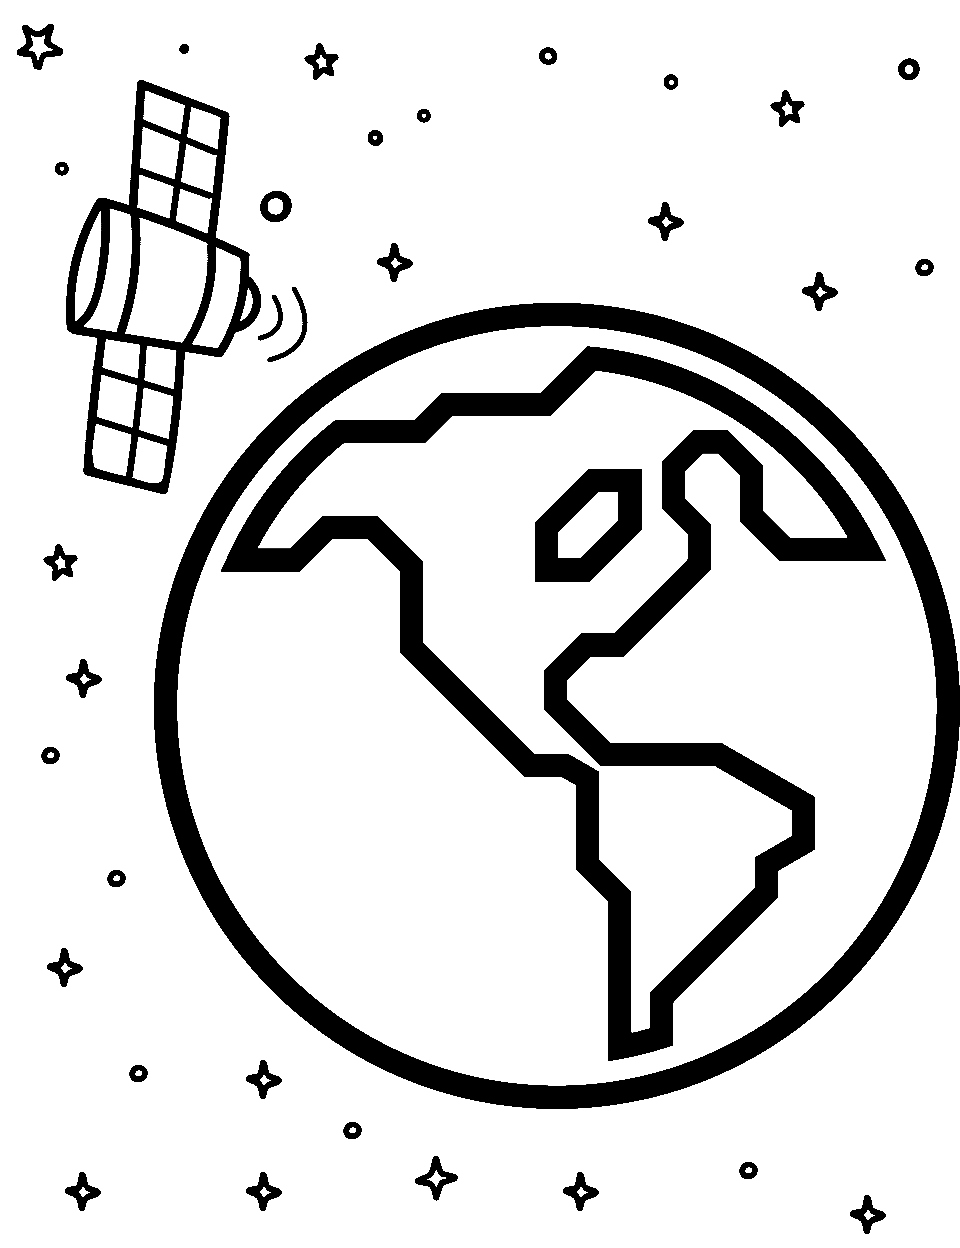 Satellite Signal Coloring Page - A satellite orbiting Earth and sending out signal waves.